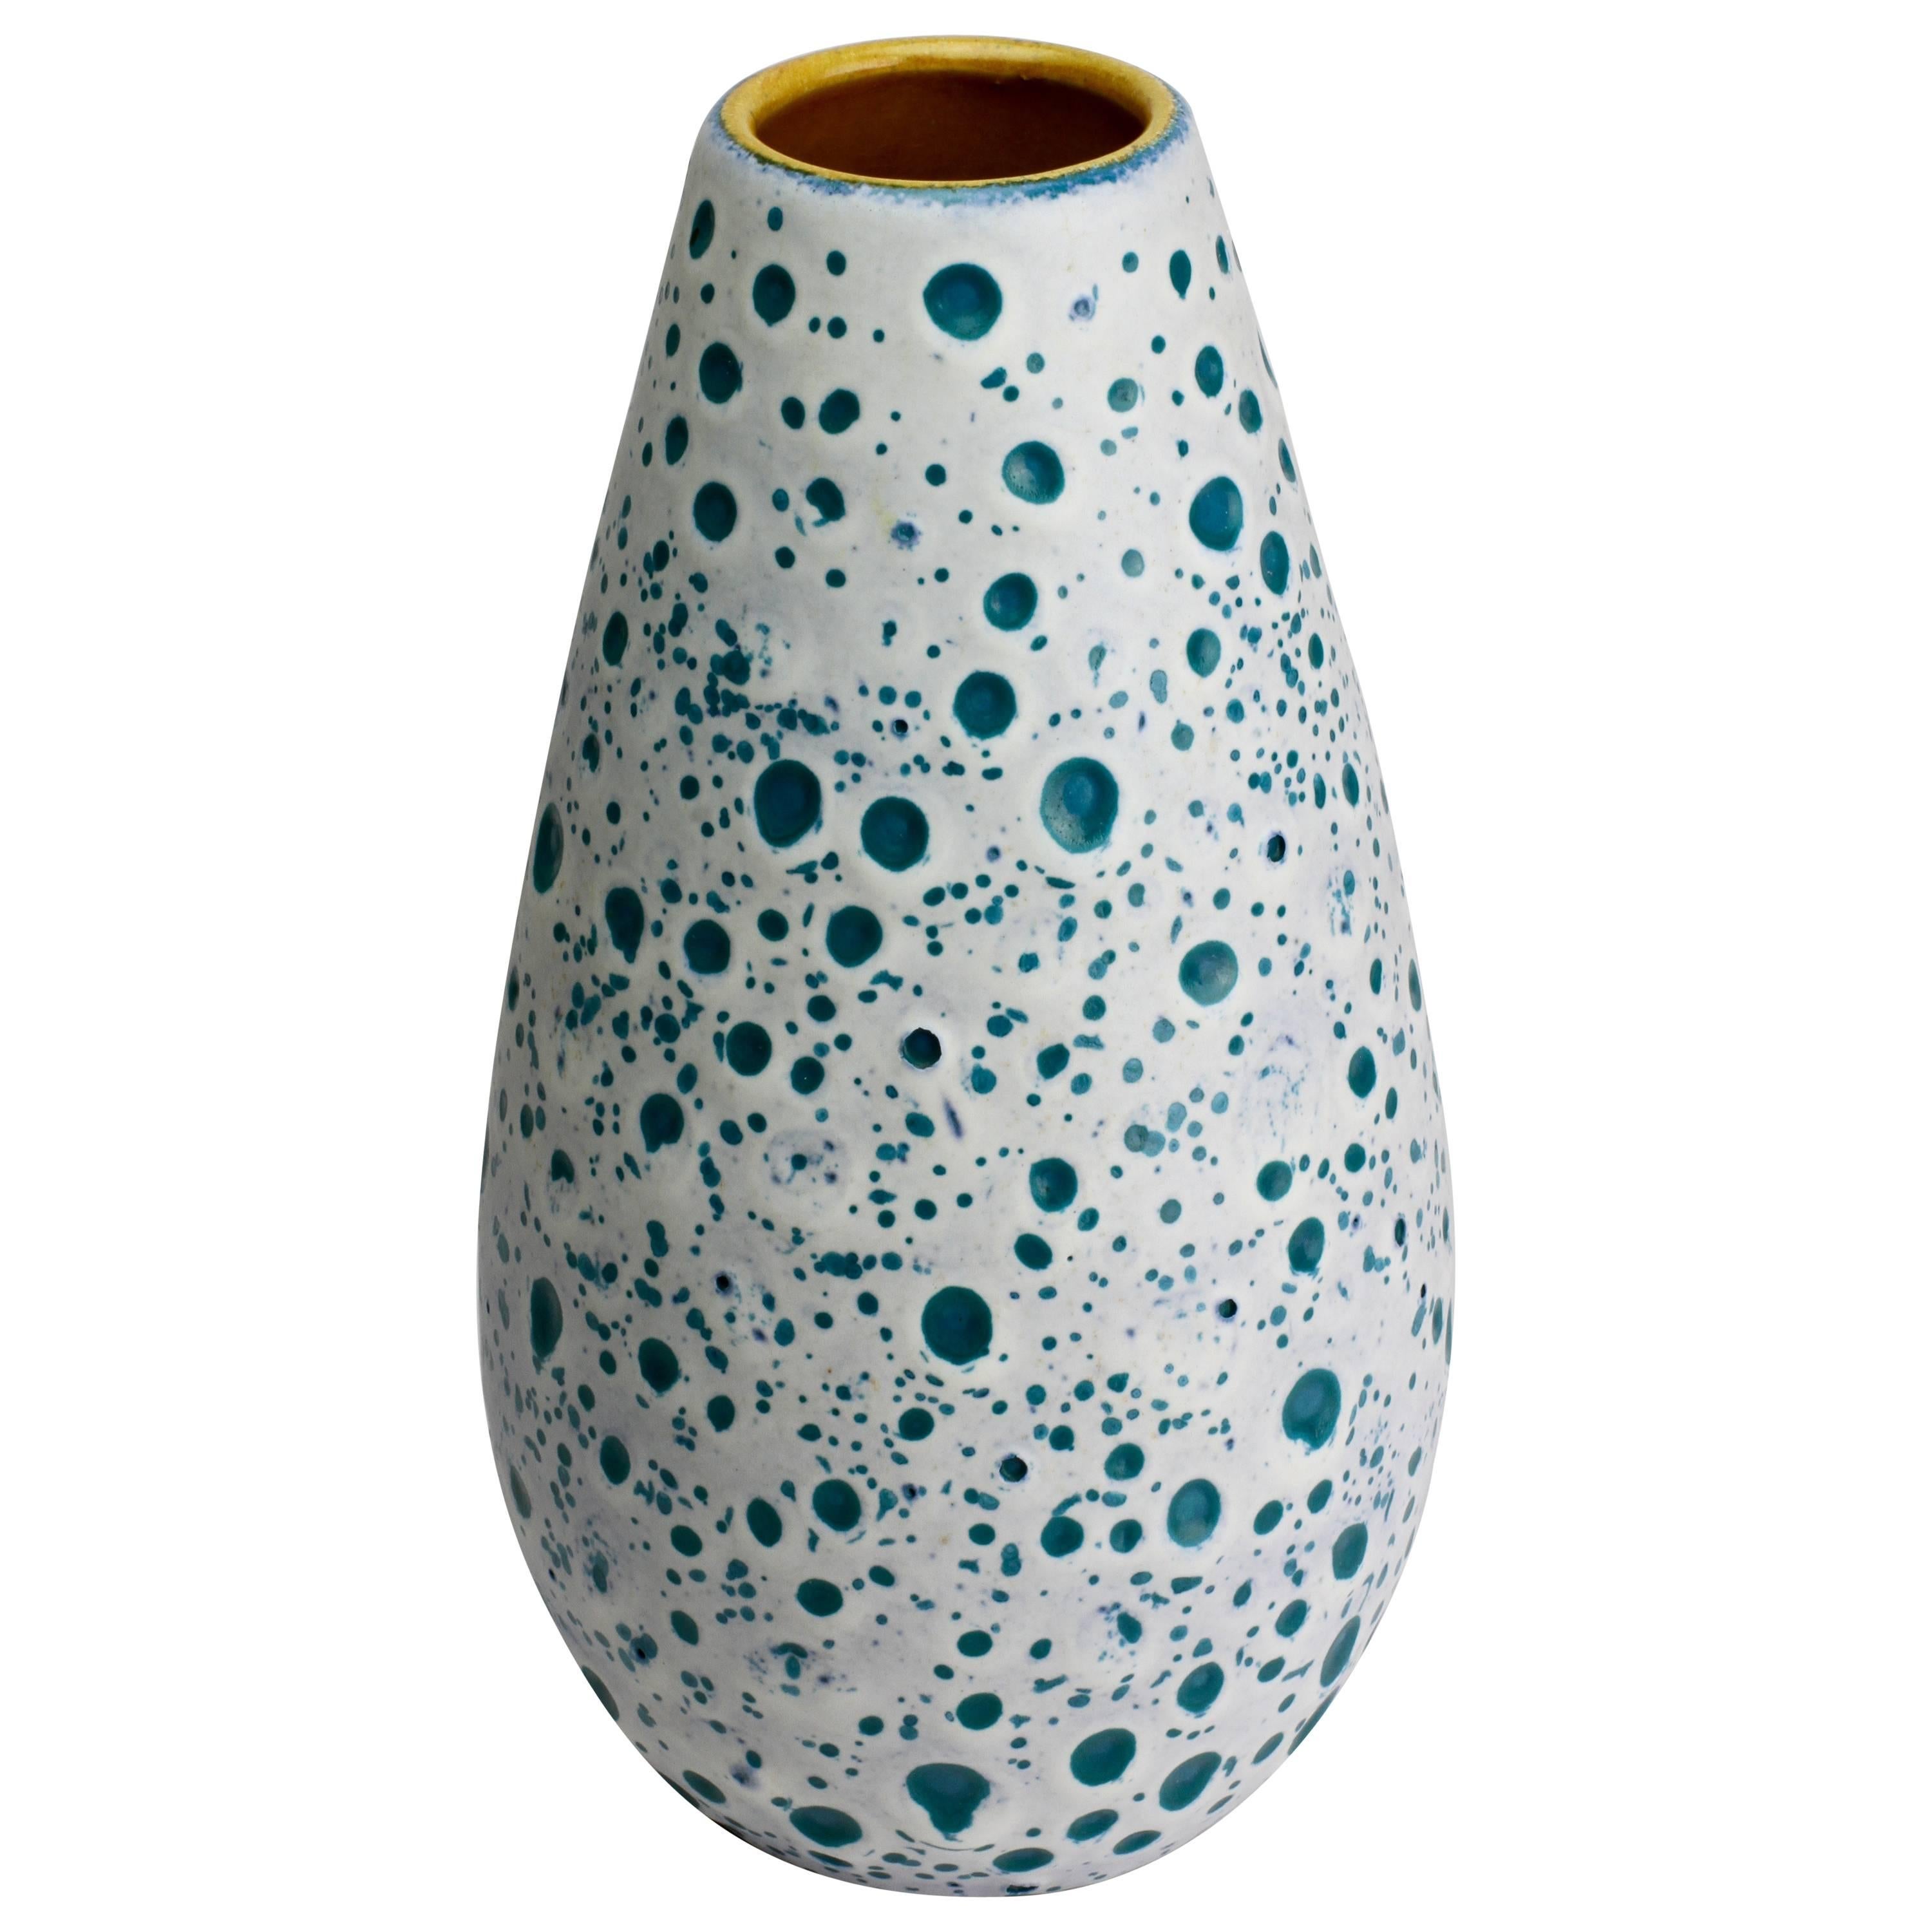 Beautiful West German Turquoise and White Moon Crater Vase by Ü-Keramik, 1960s